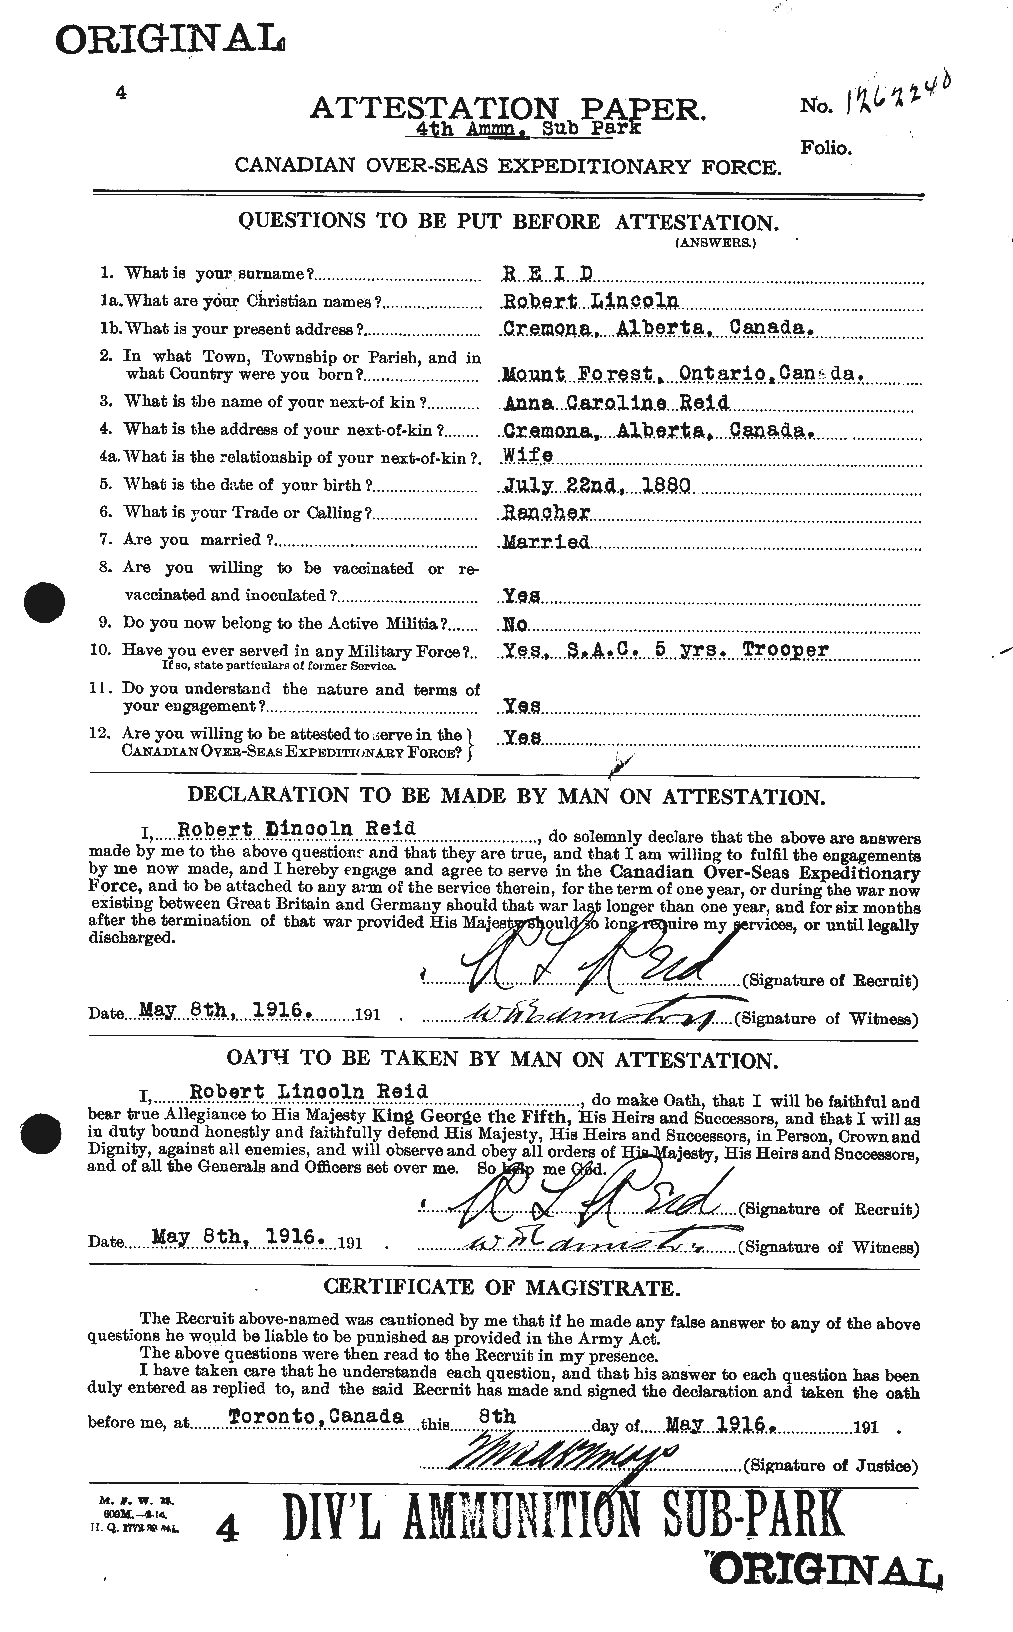 Personnel Records of the First World War - CEF 601911a